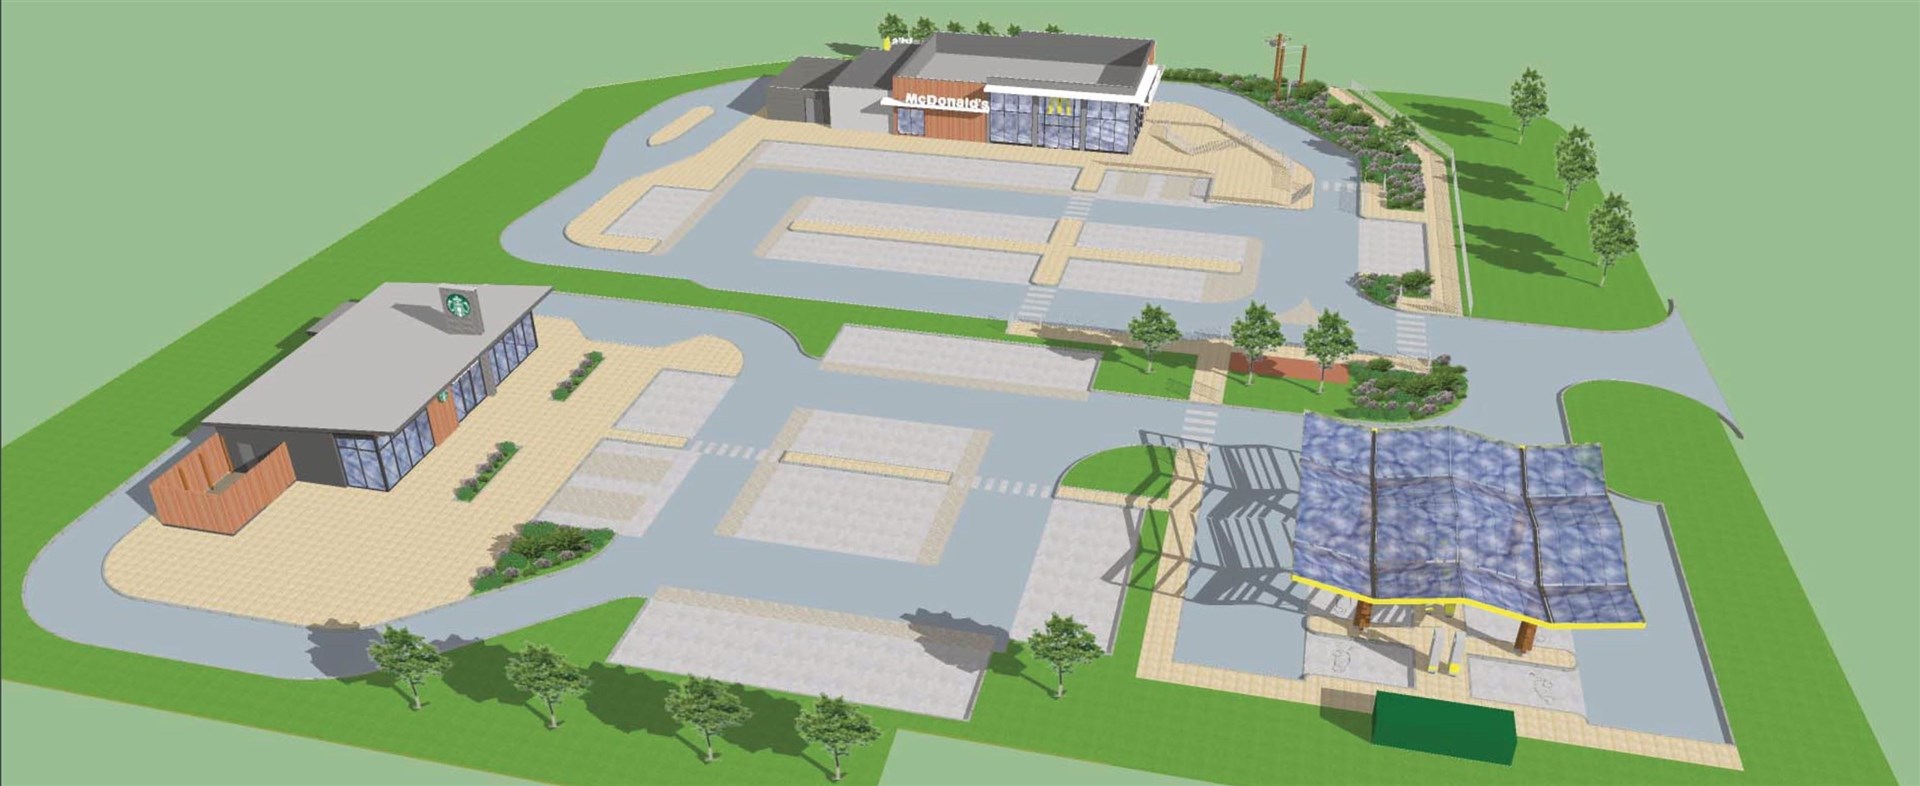 Artist's impression of what the Linnorie Huntly development could look like.